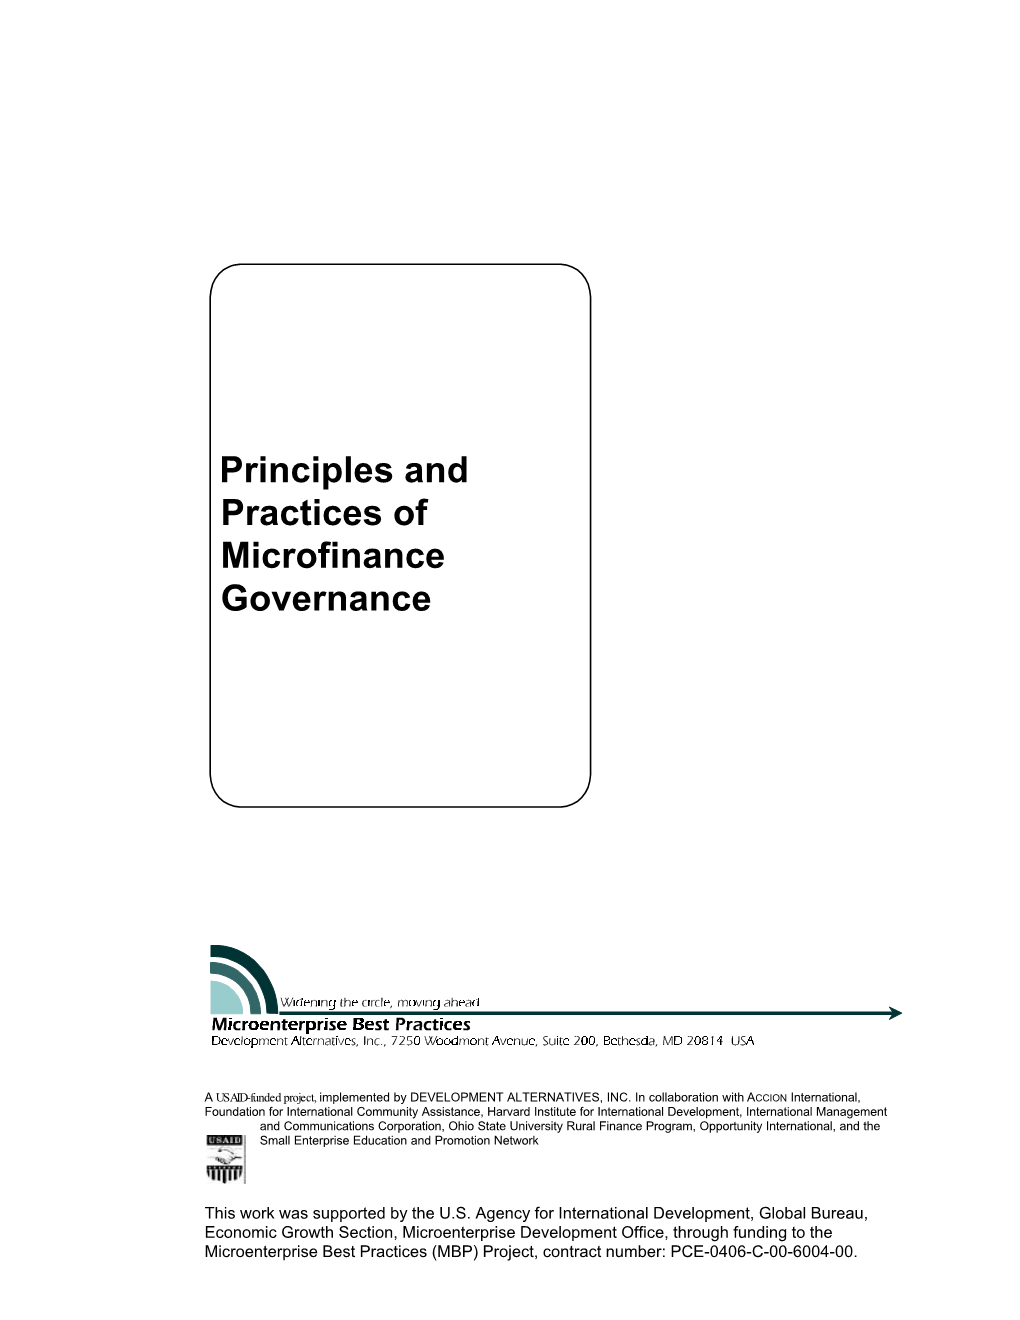 Principles and Practices of Microfinance Governance